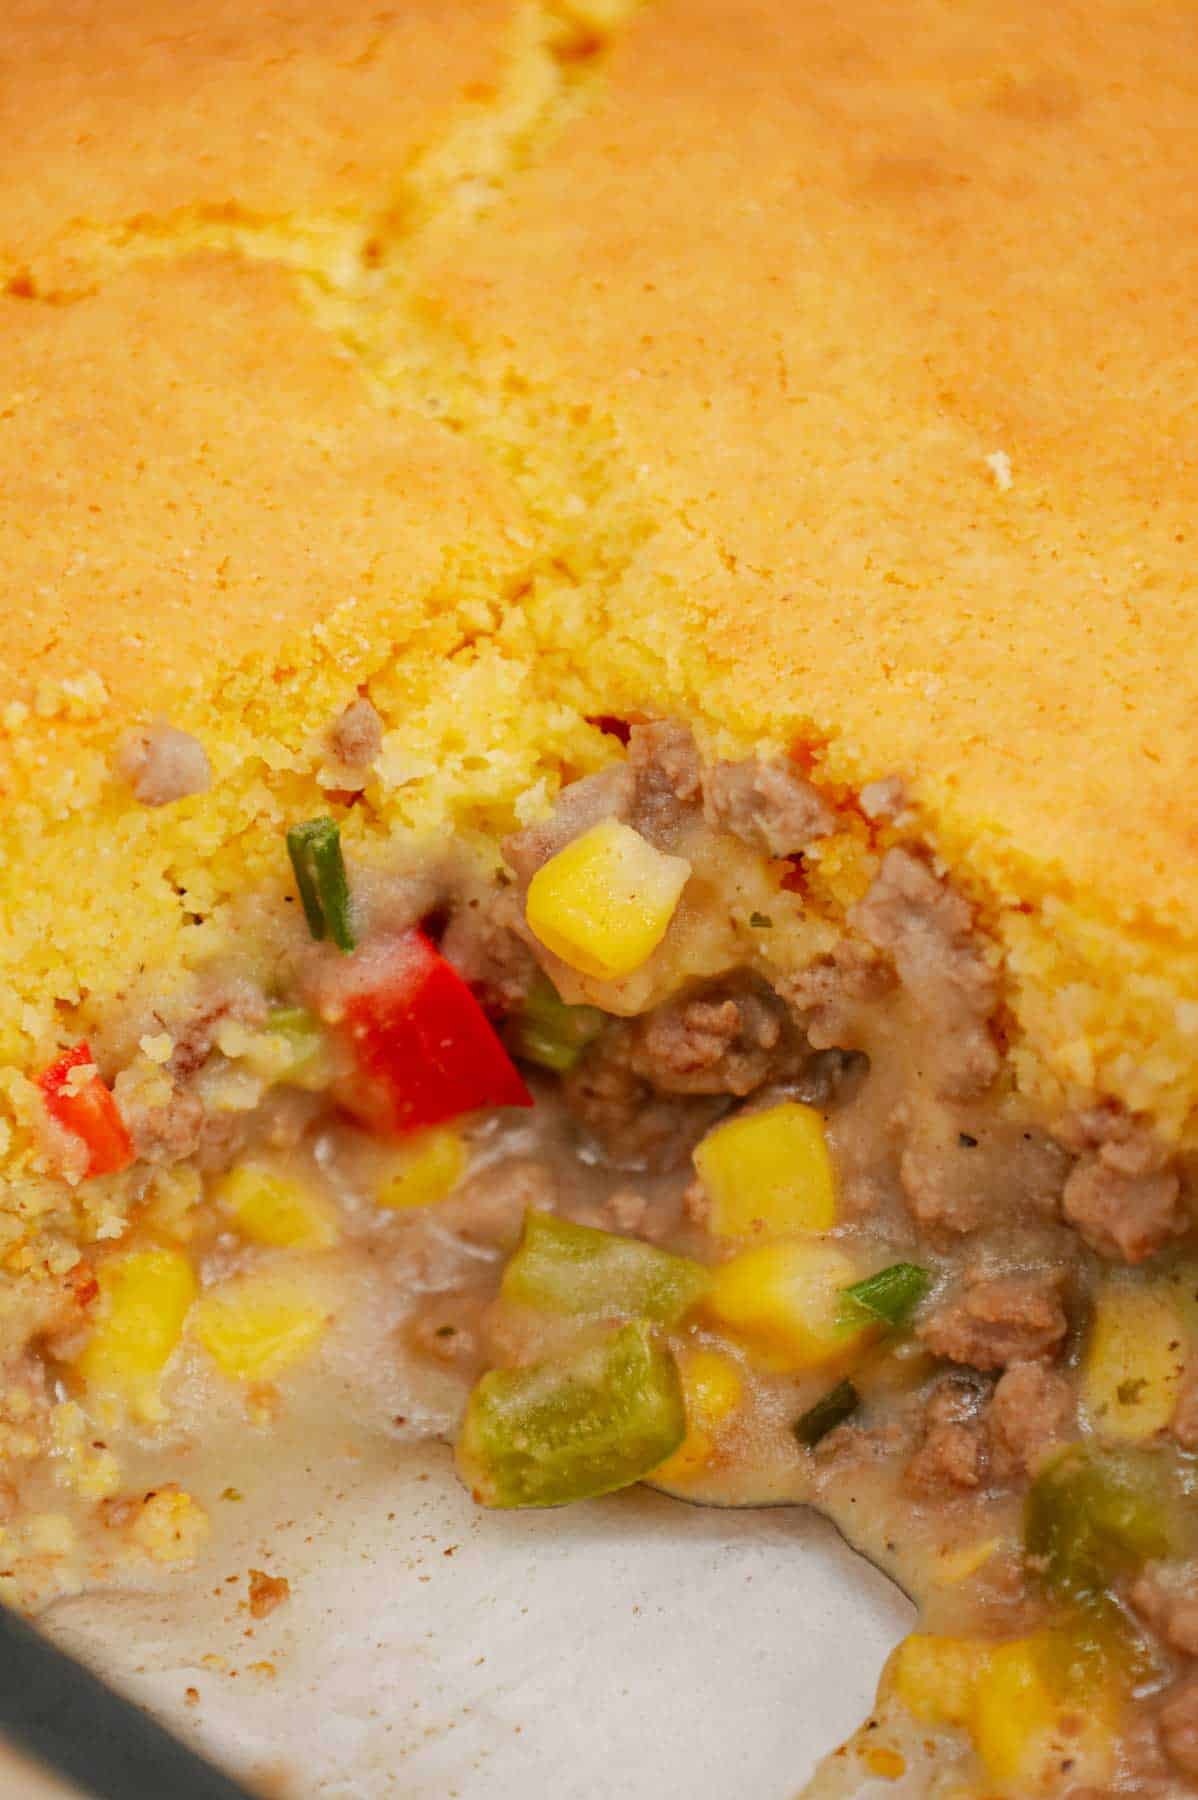 Shepherd's Pie with Cornbread is a Tex-Mex twist on a classic dish using Jiffy corn muffin mix, diced red and green peppers, corn, ground beef, instant mashed potatoes and chopped green onions.